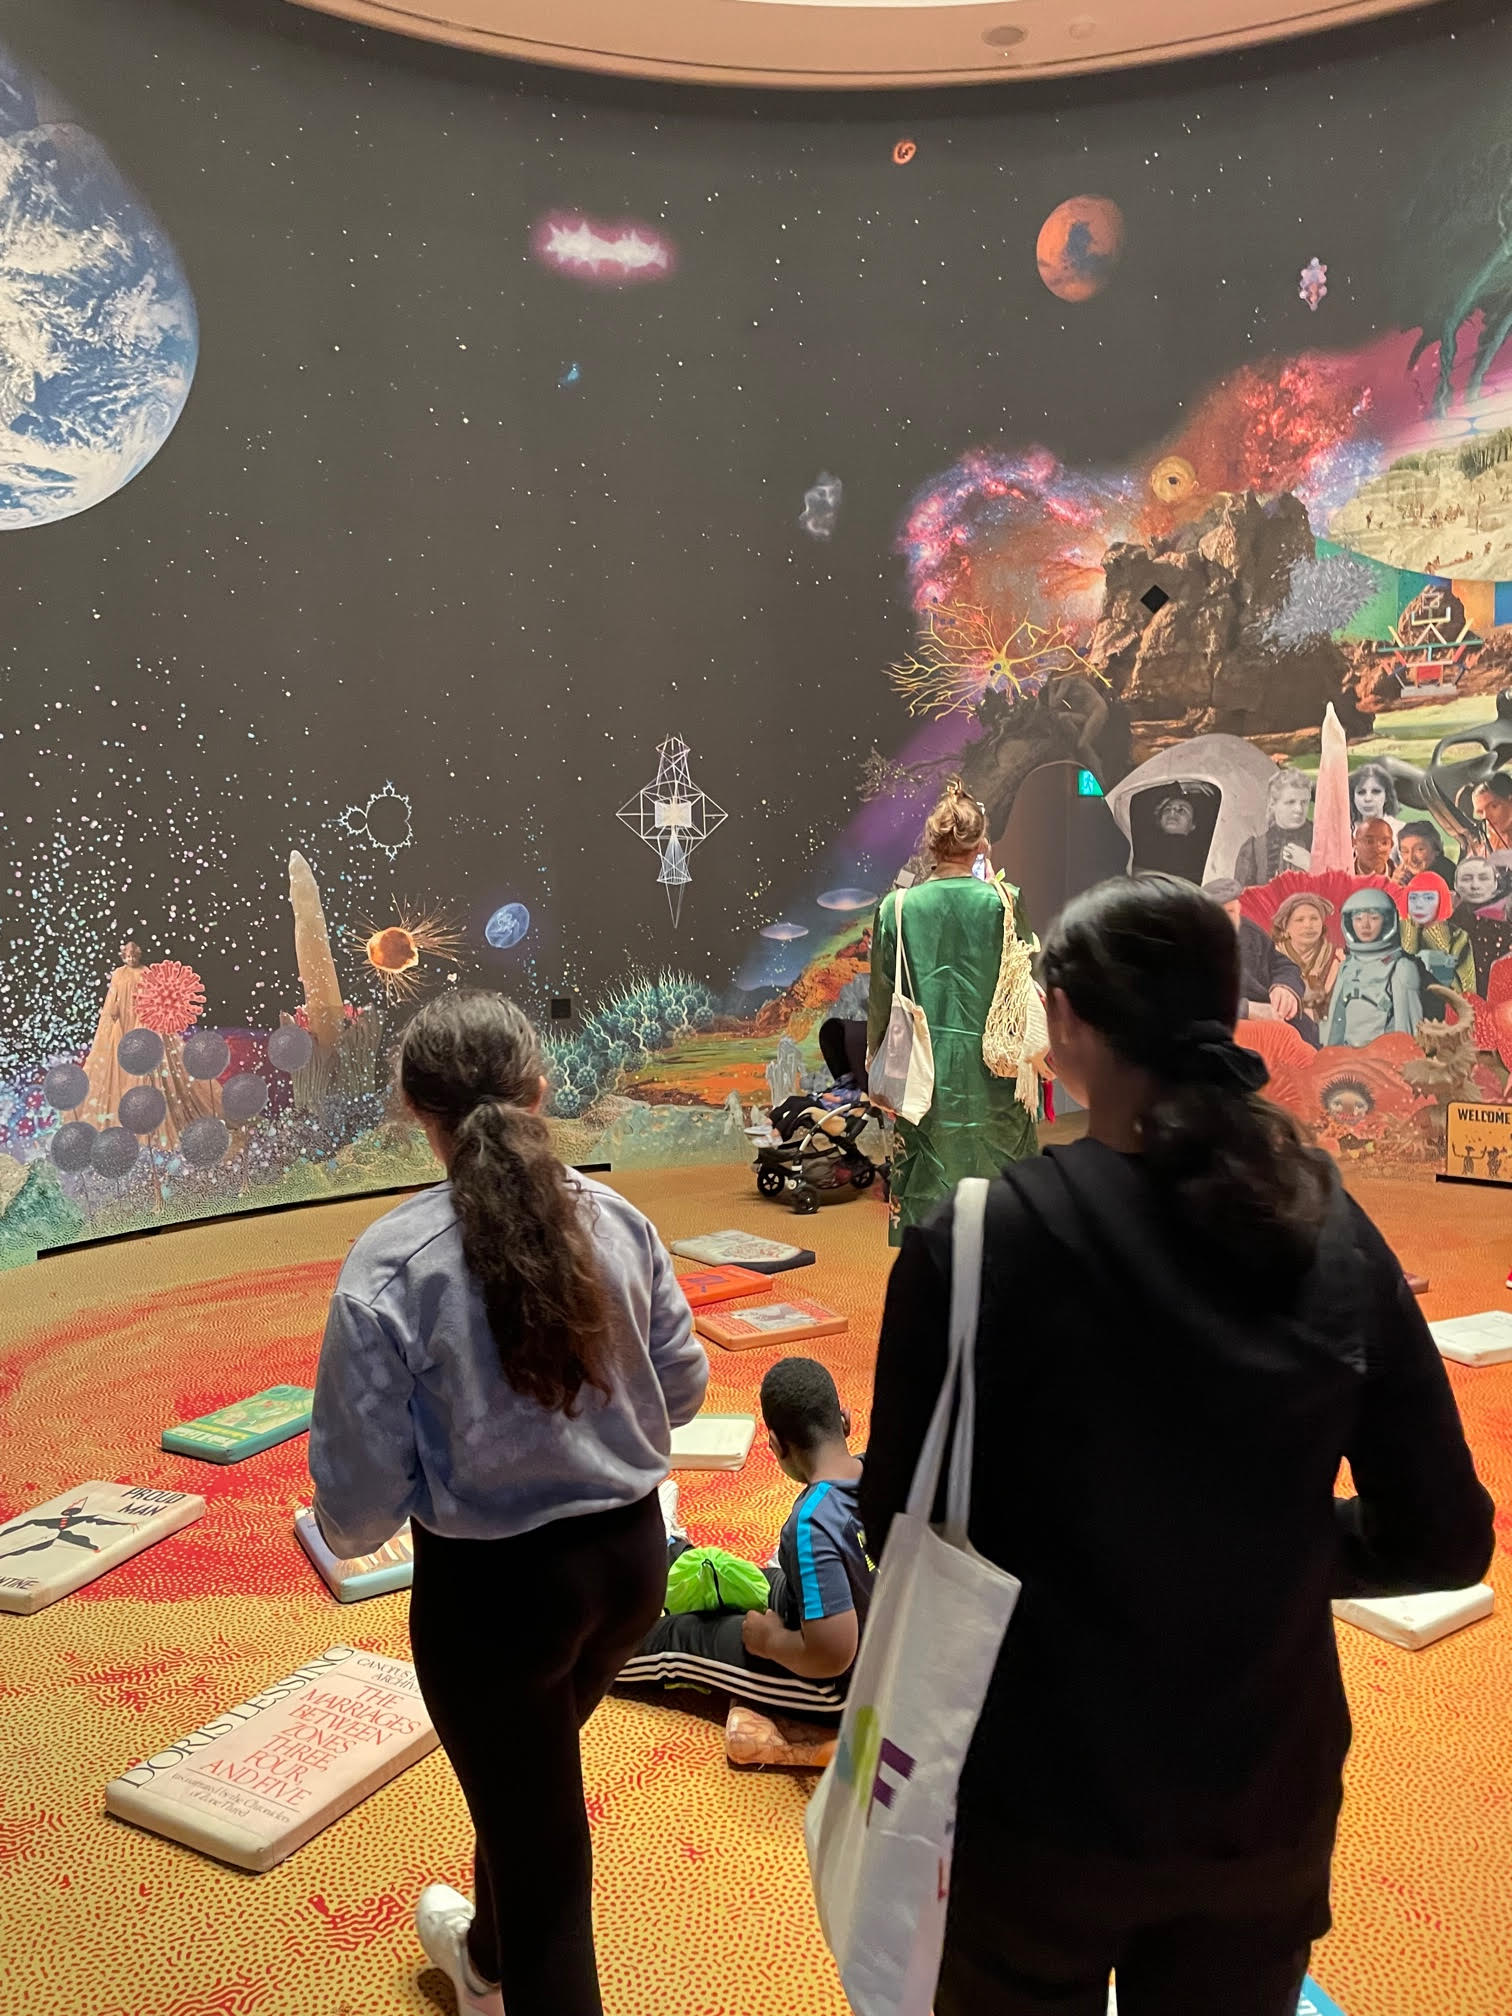 Group of young people standing, sitting and walking in a room with a huge image of earth and outer space on the wall